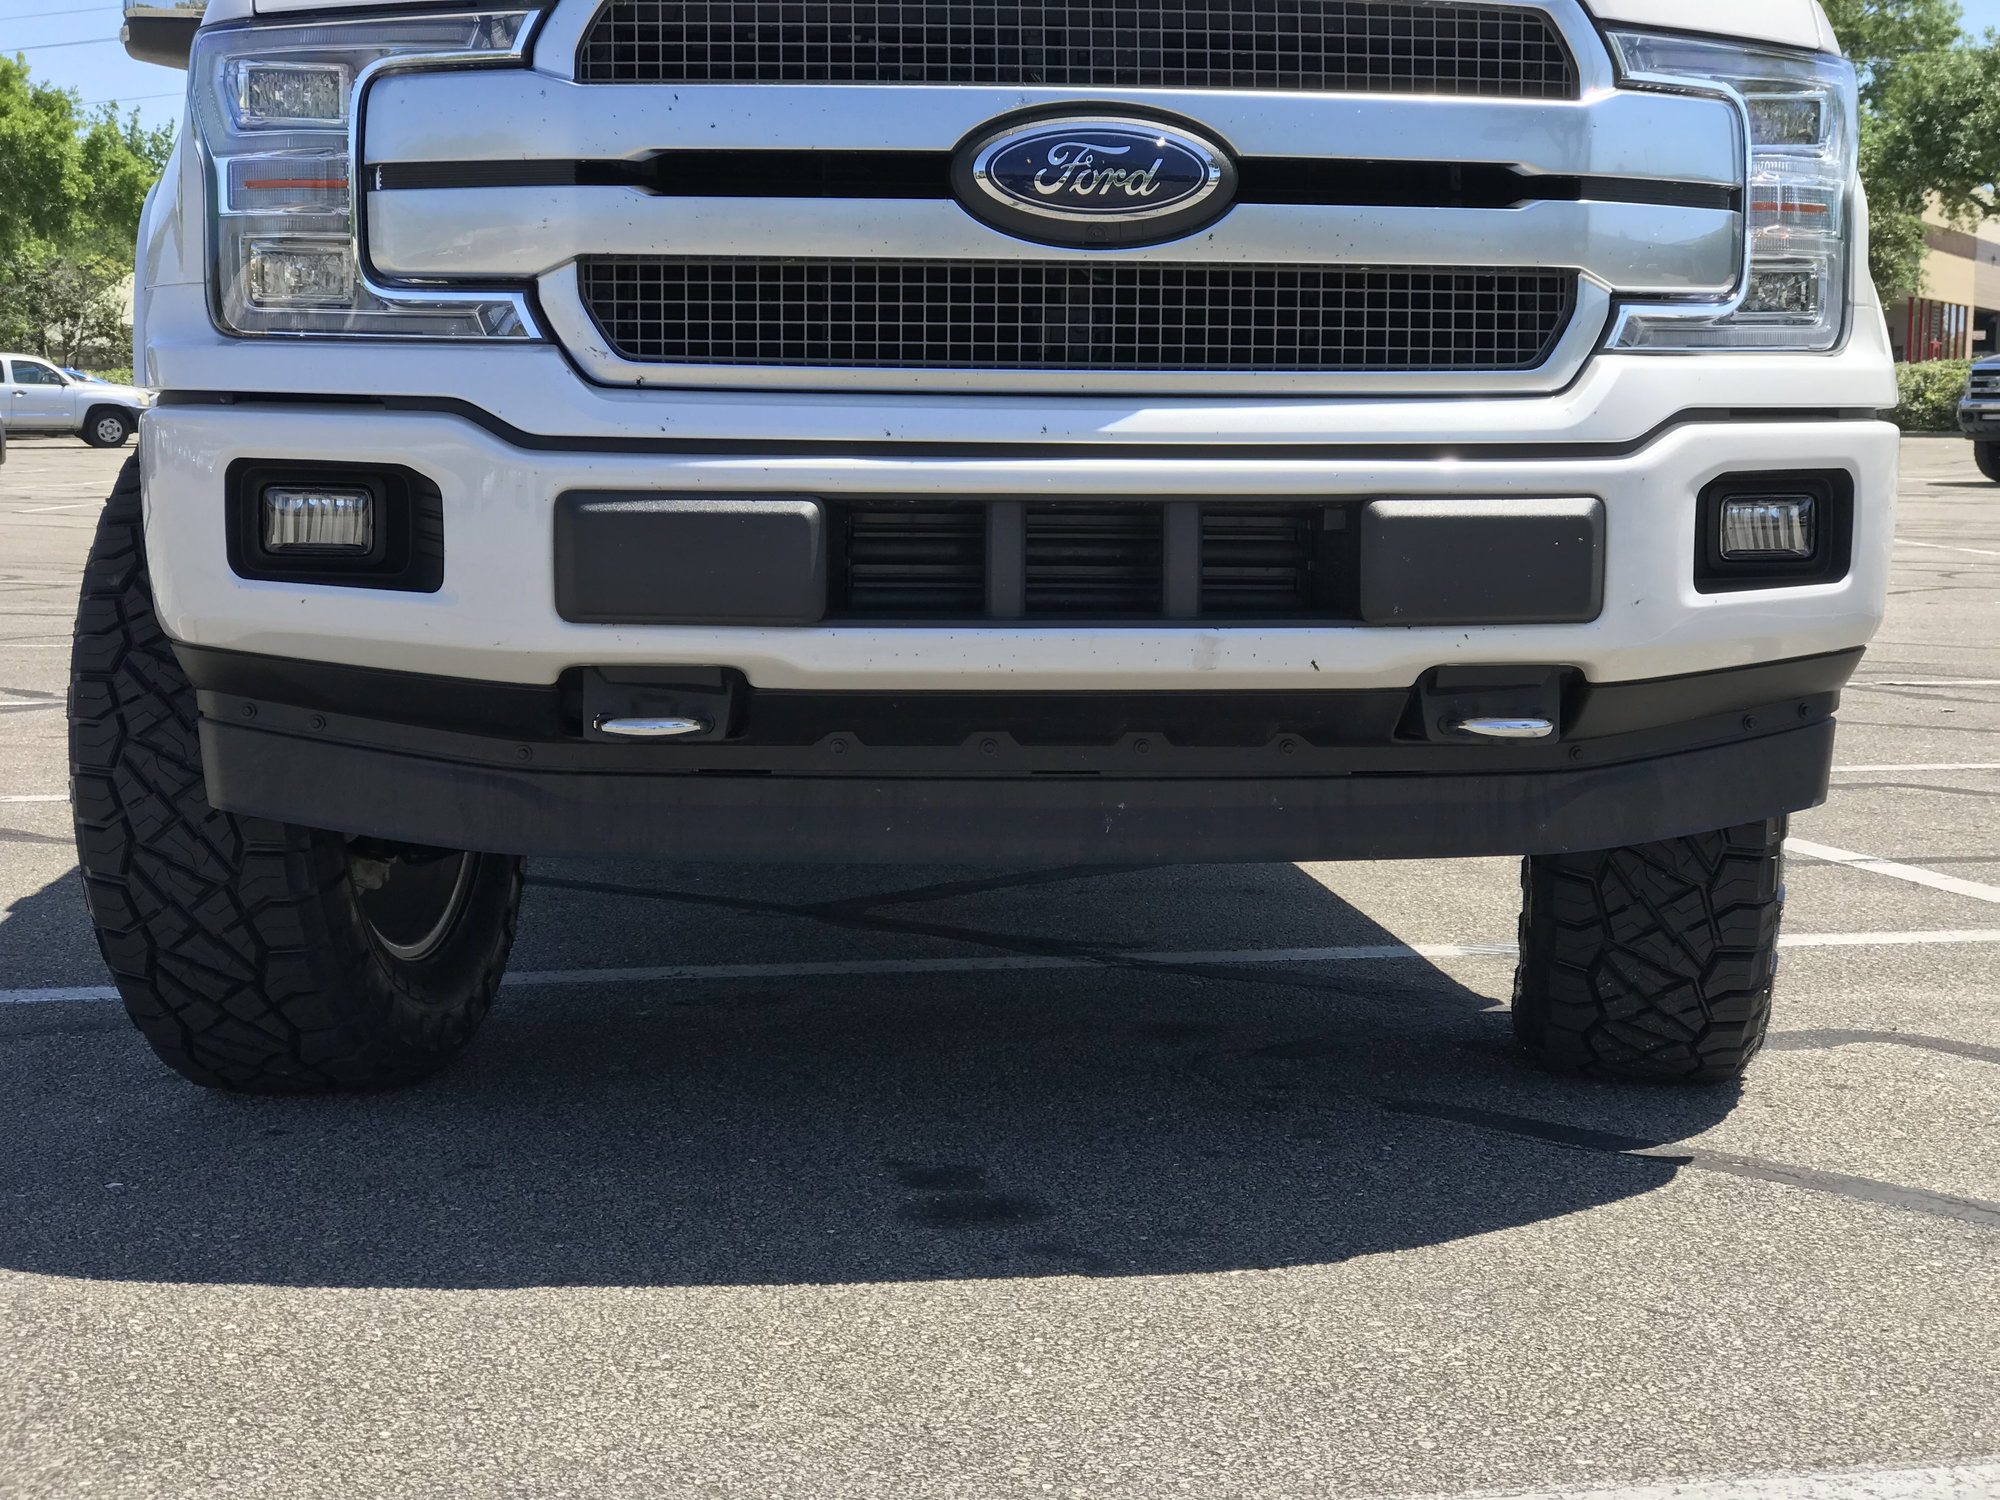 New 35s On 18 Platinum F 150 Ecoboost The Hull Truth Boating And Fishing Forum